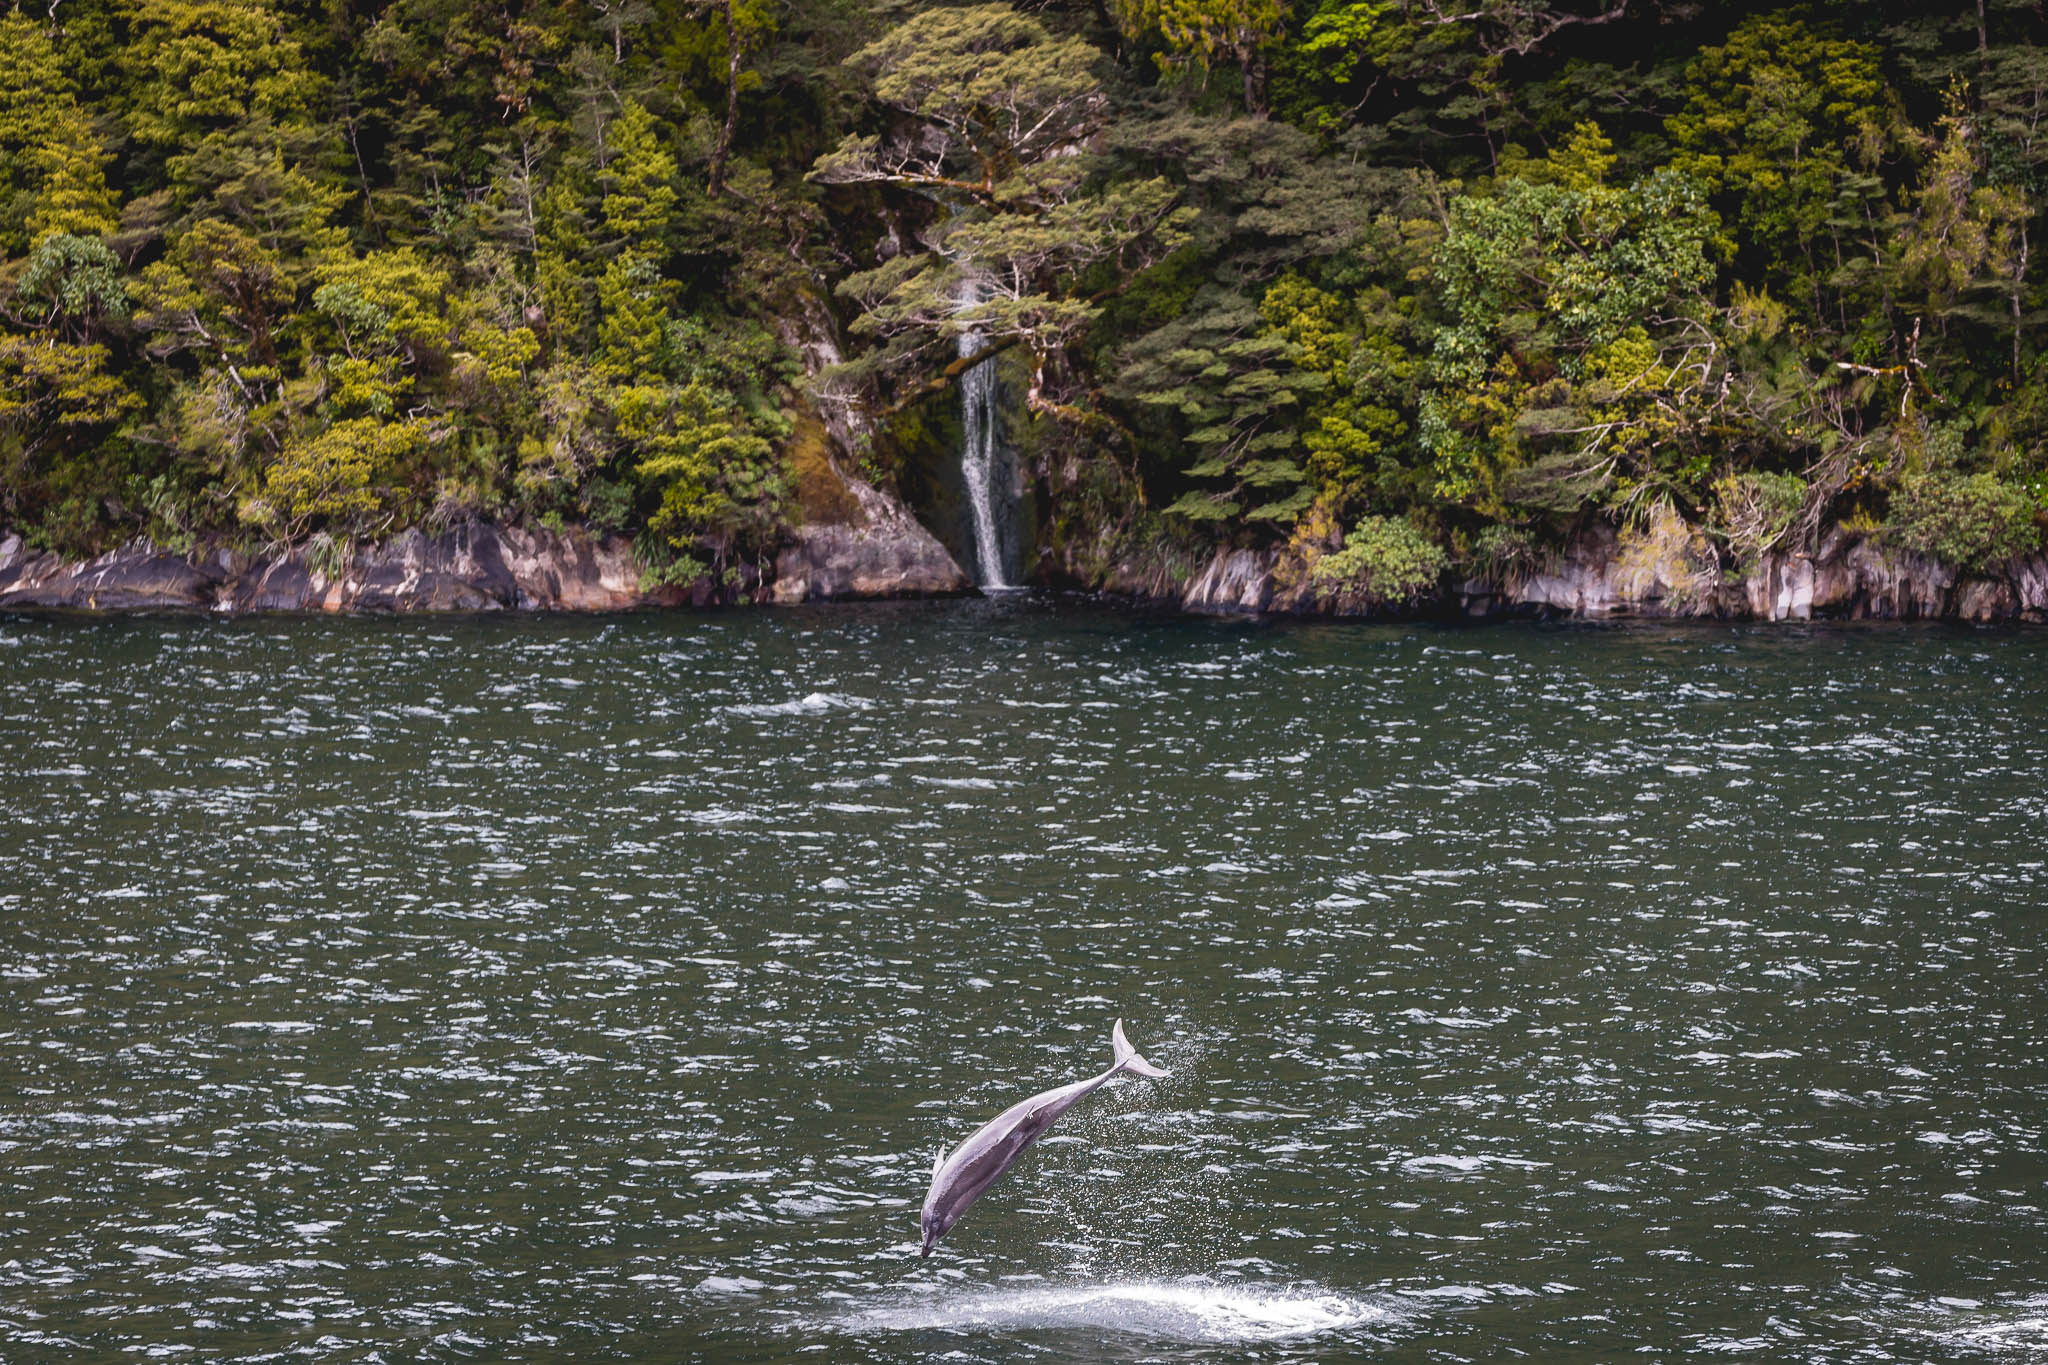 Dolphin jumping from the water in Doubtful Sound with small waterfall in background